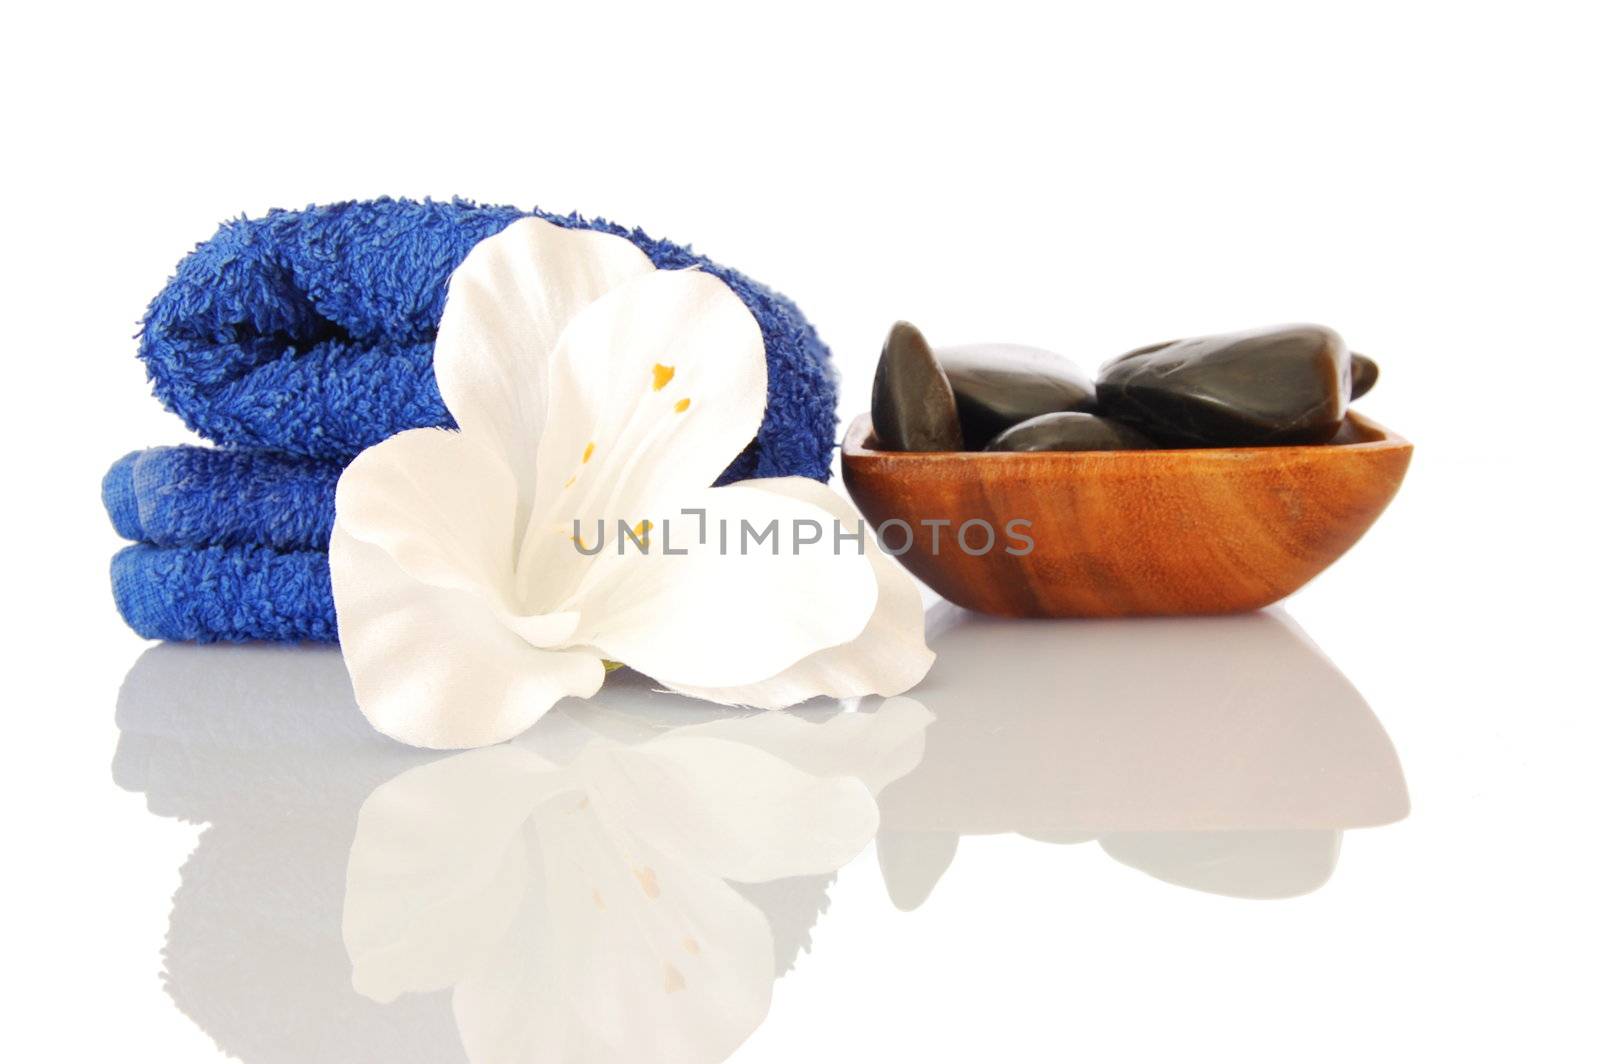 bath and aromatherapy still life isolated on white background